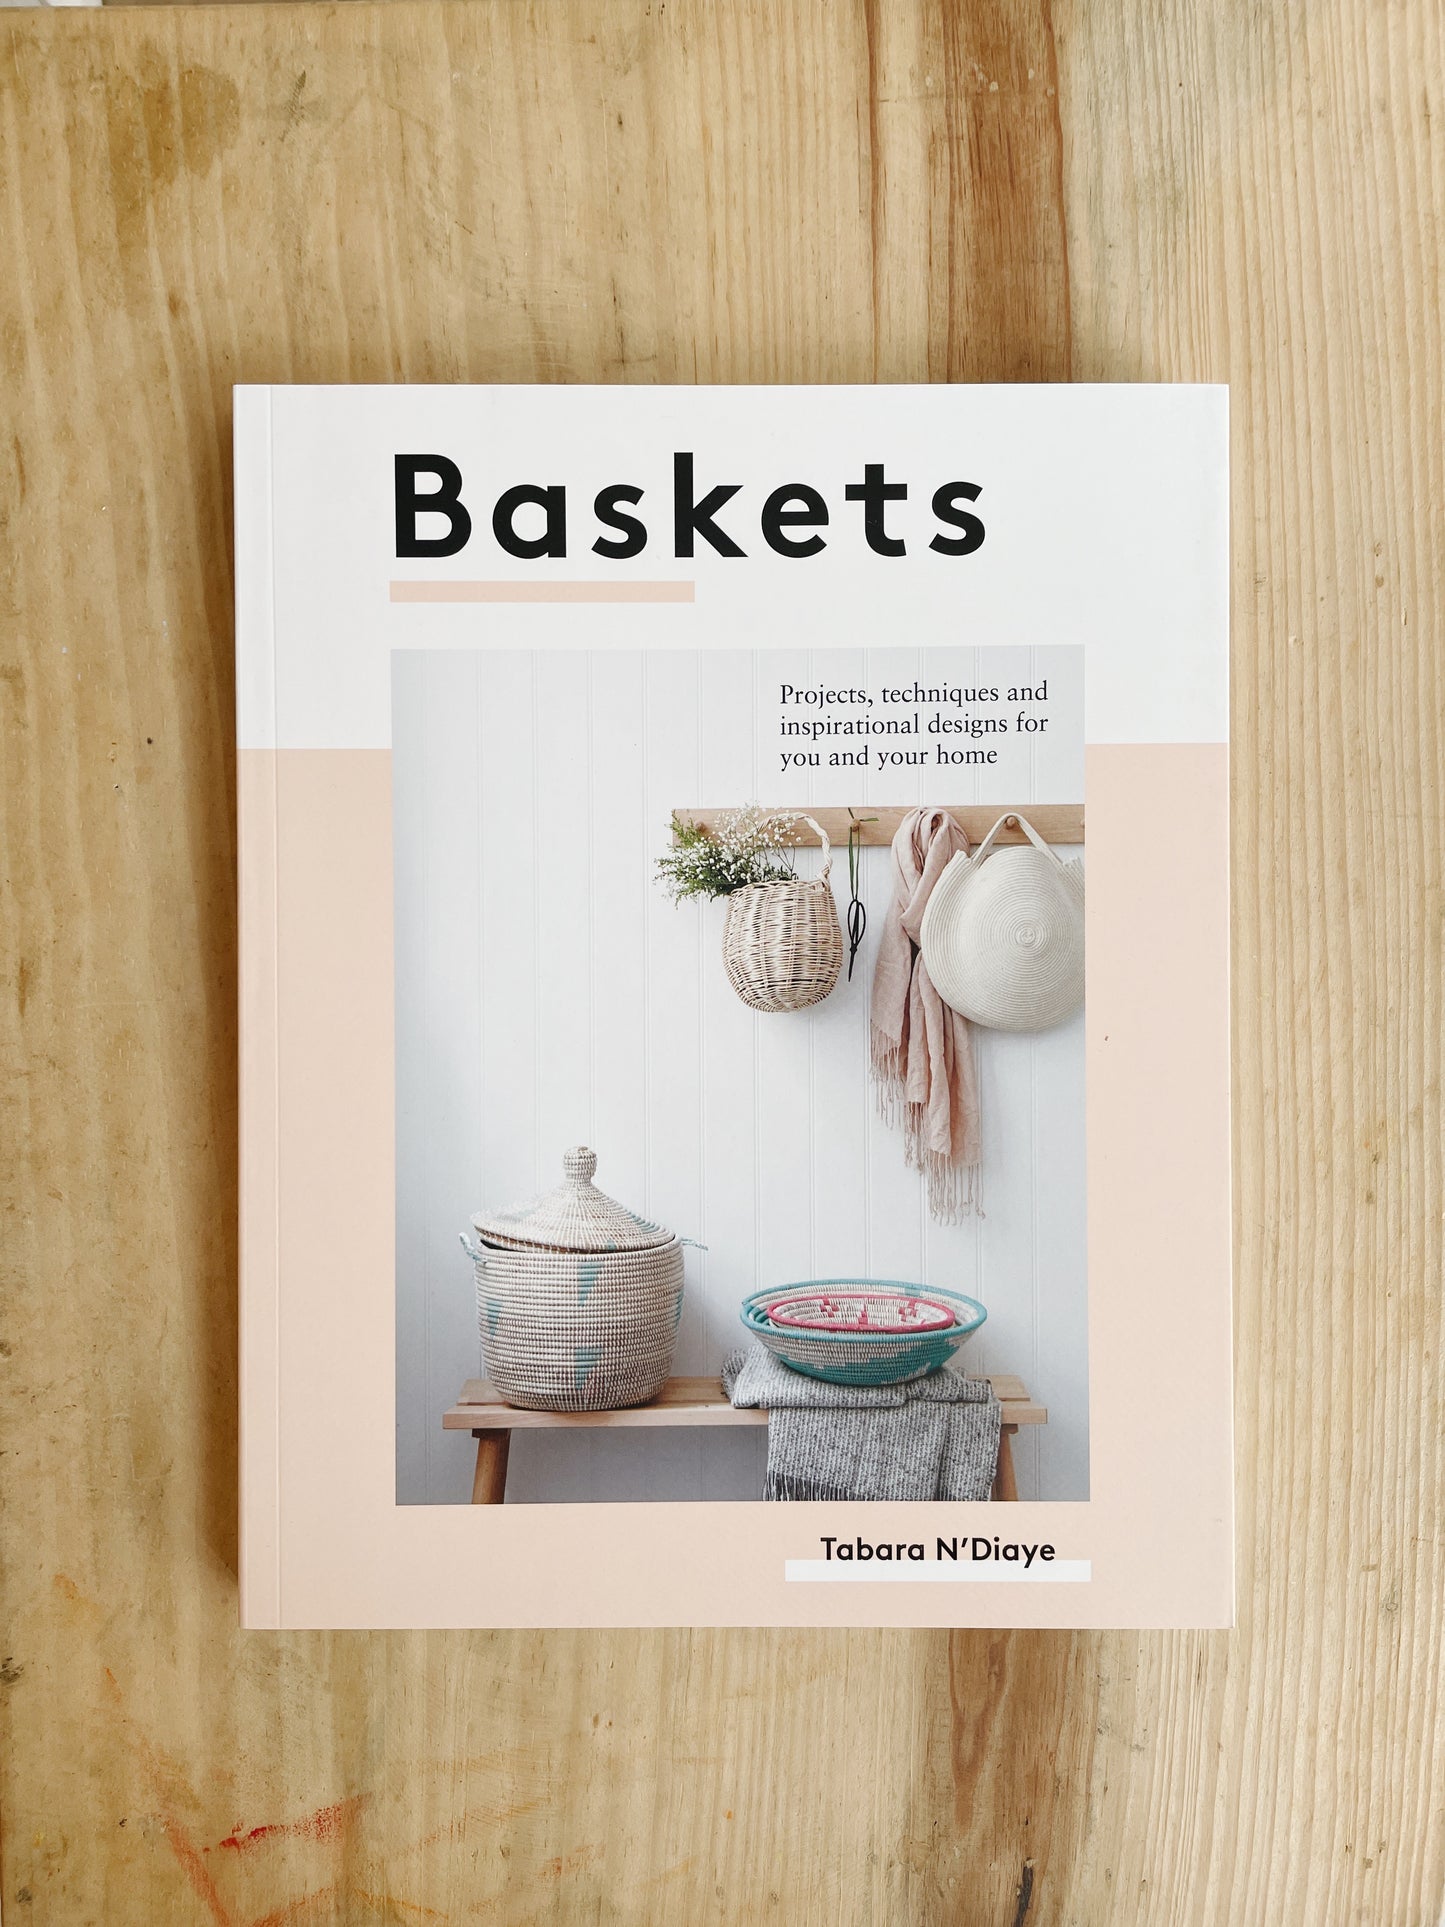 Tabara N'Diaye - Baskets: Projects, techniques and inspirational designs for you and your home